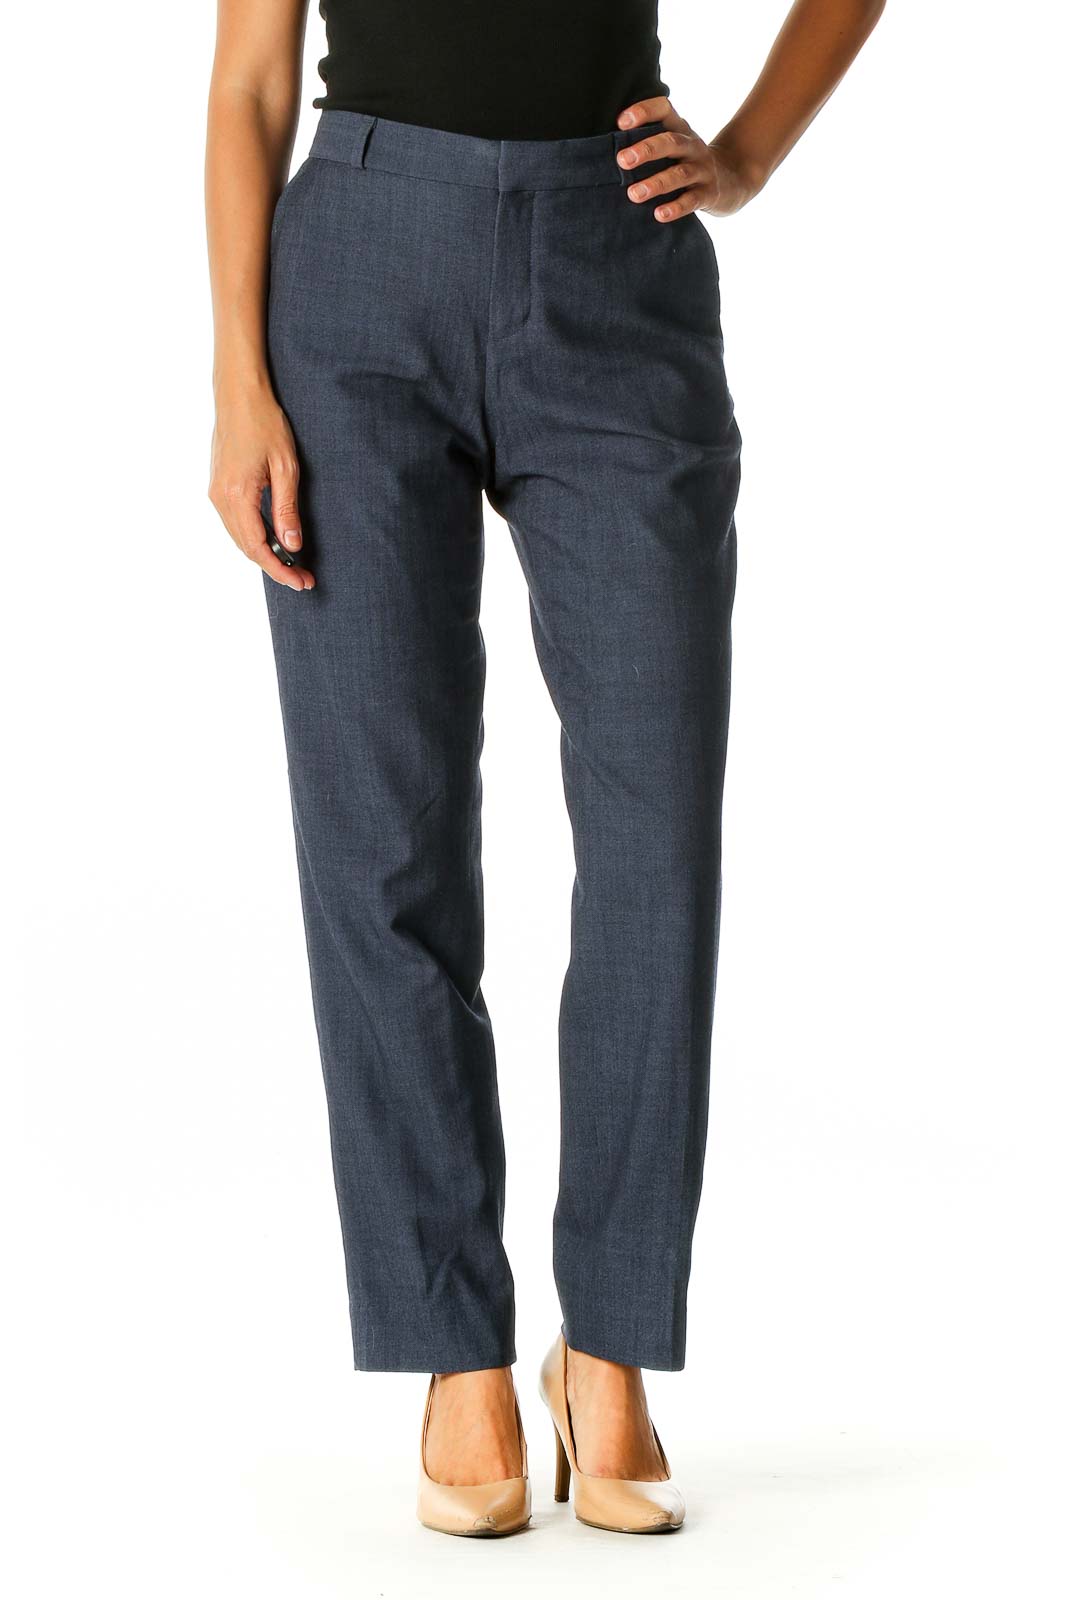 Blue Solid Formal Trousers Front